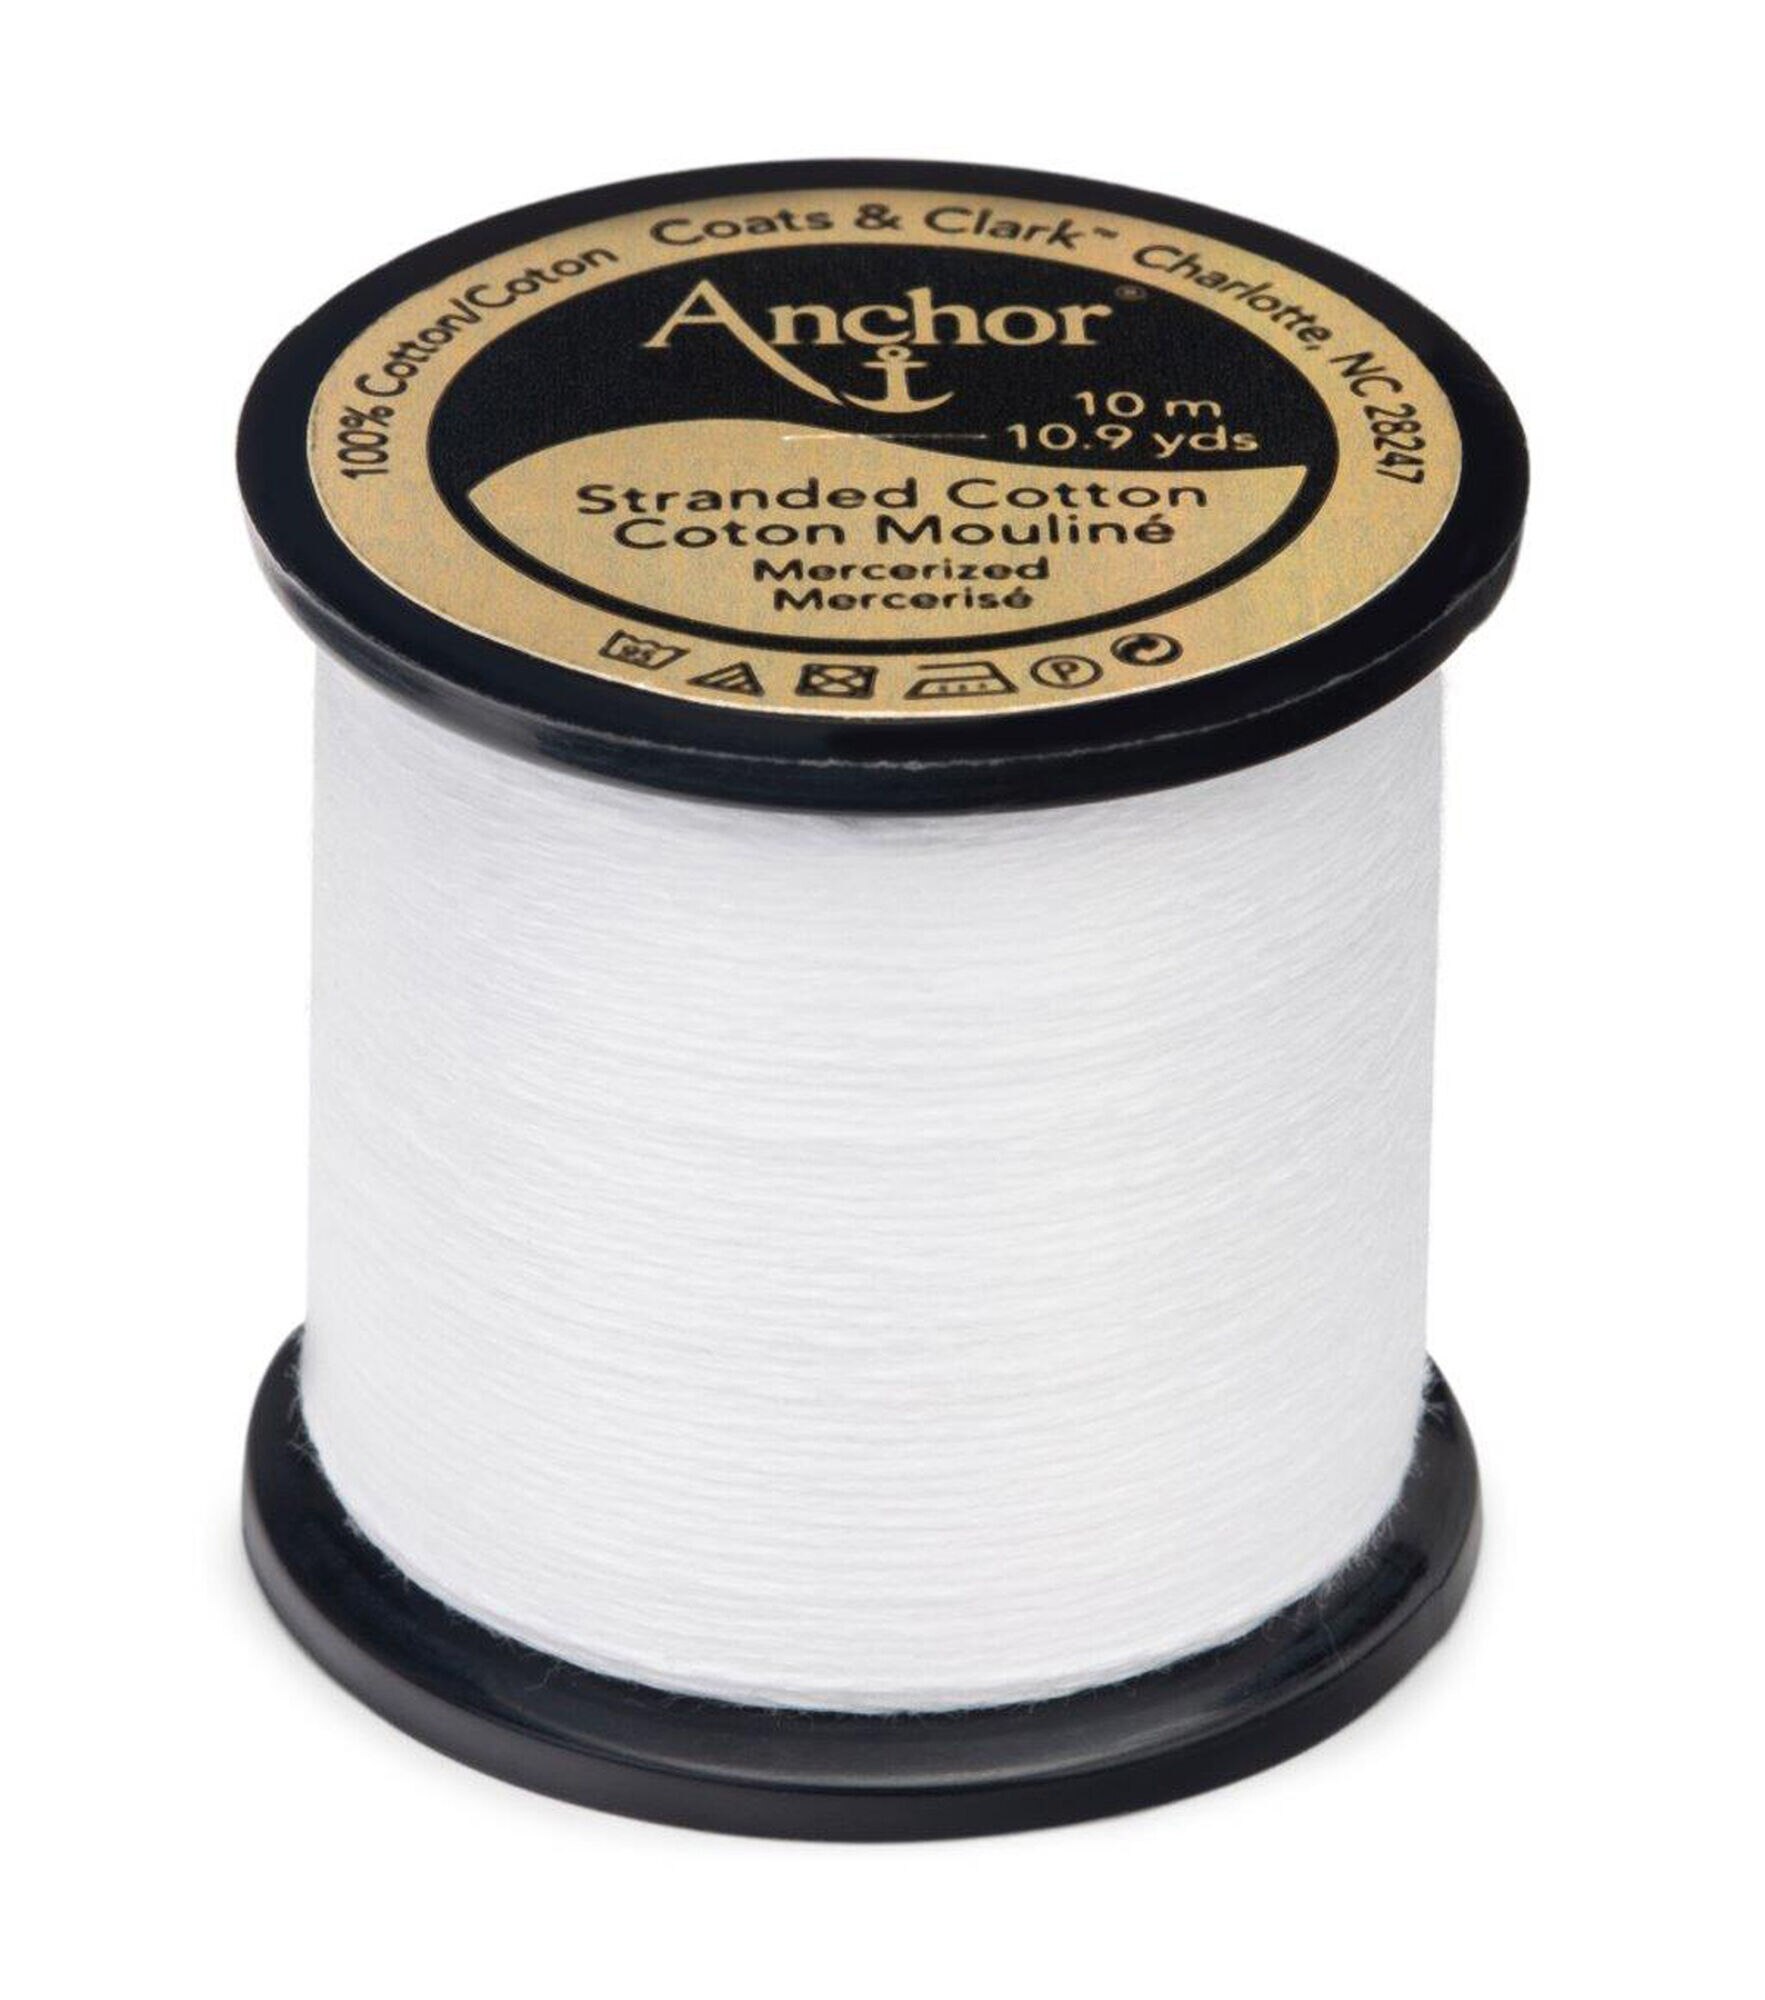 6 White ANCHOR® Stranded Cotton Embroidery Thread Skein /Floss Cross Long  Stitch